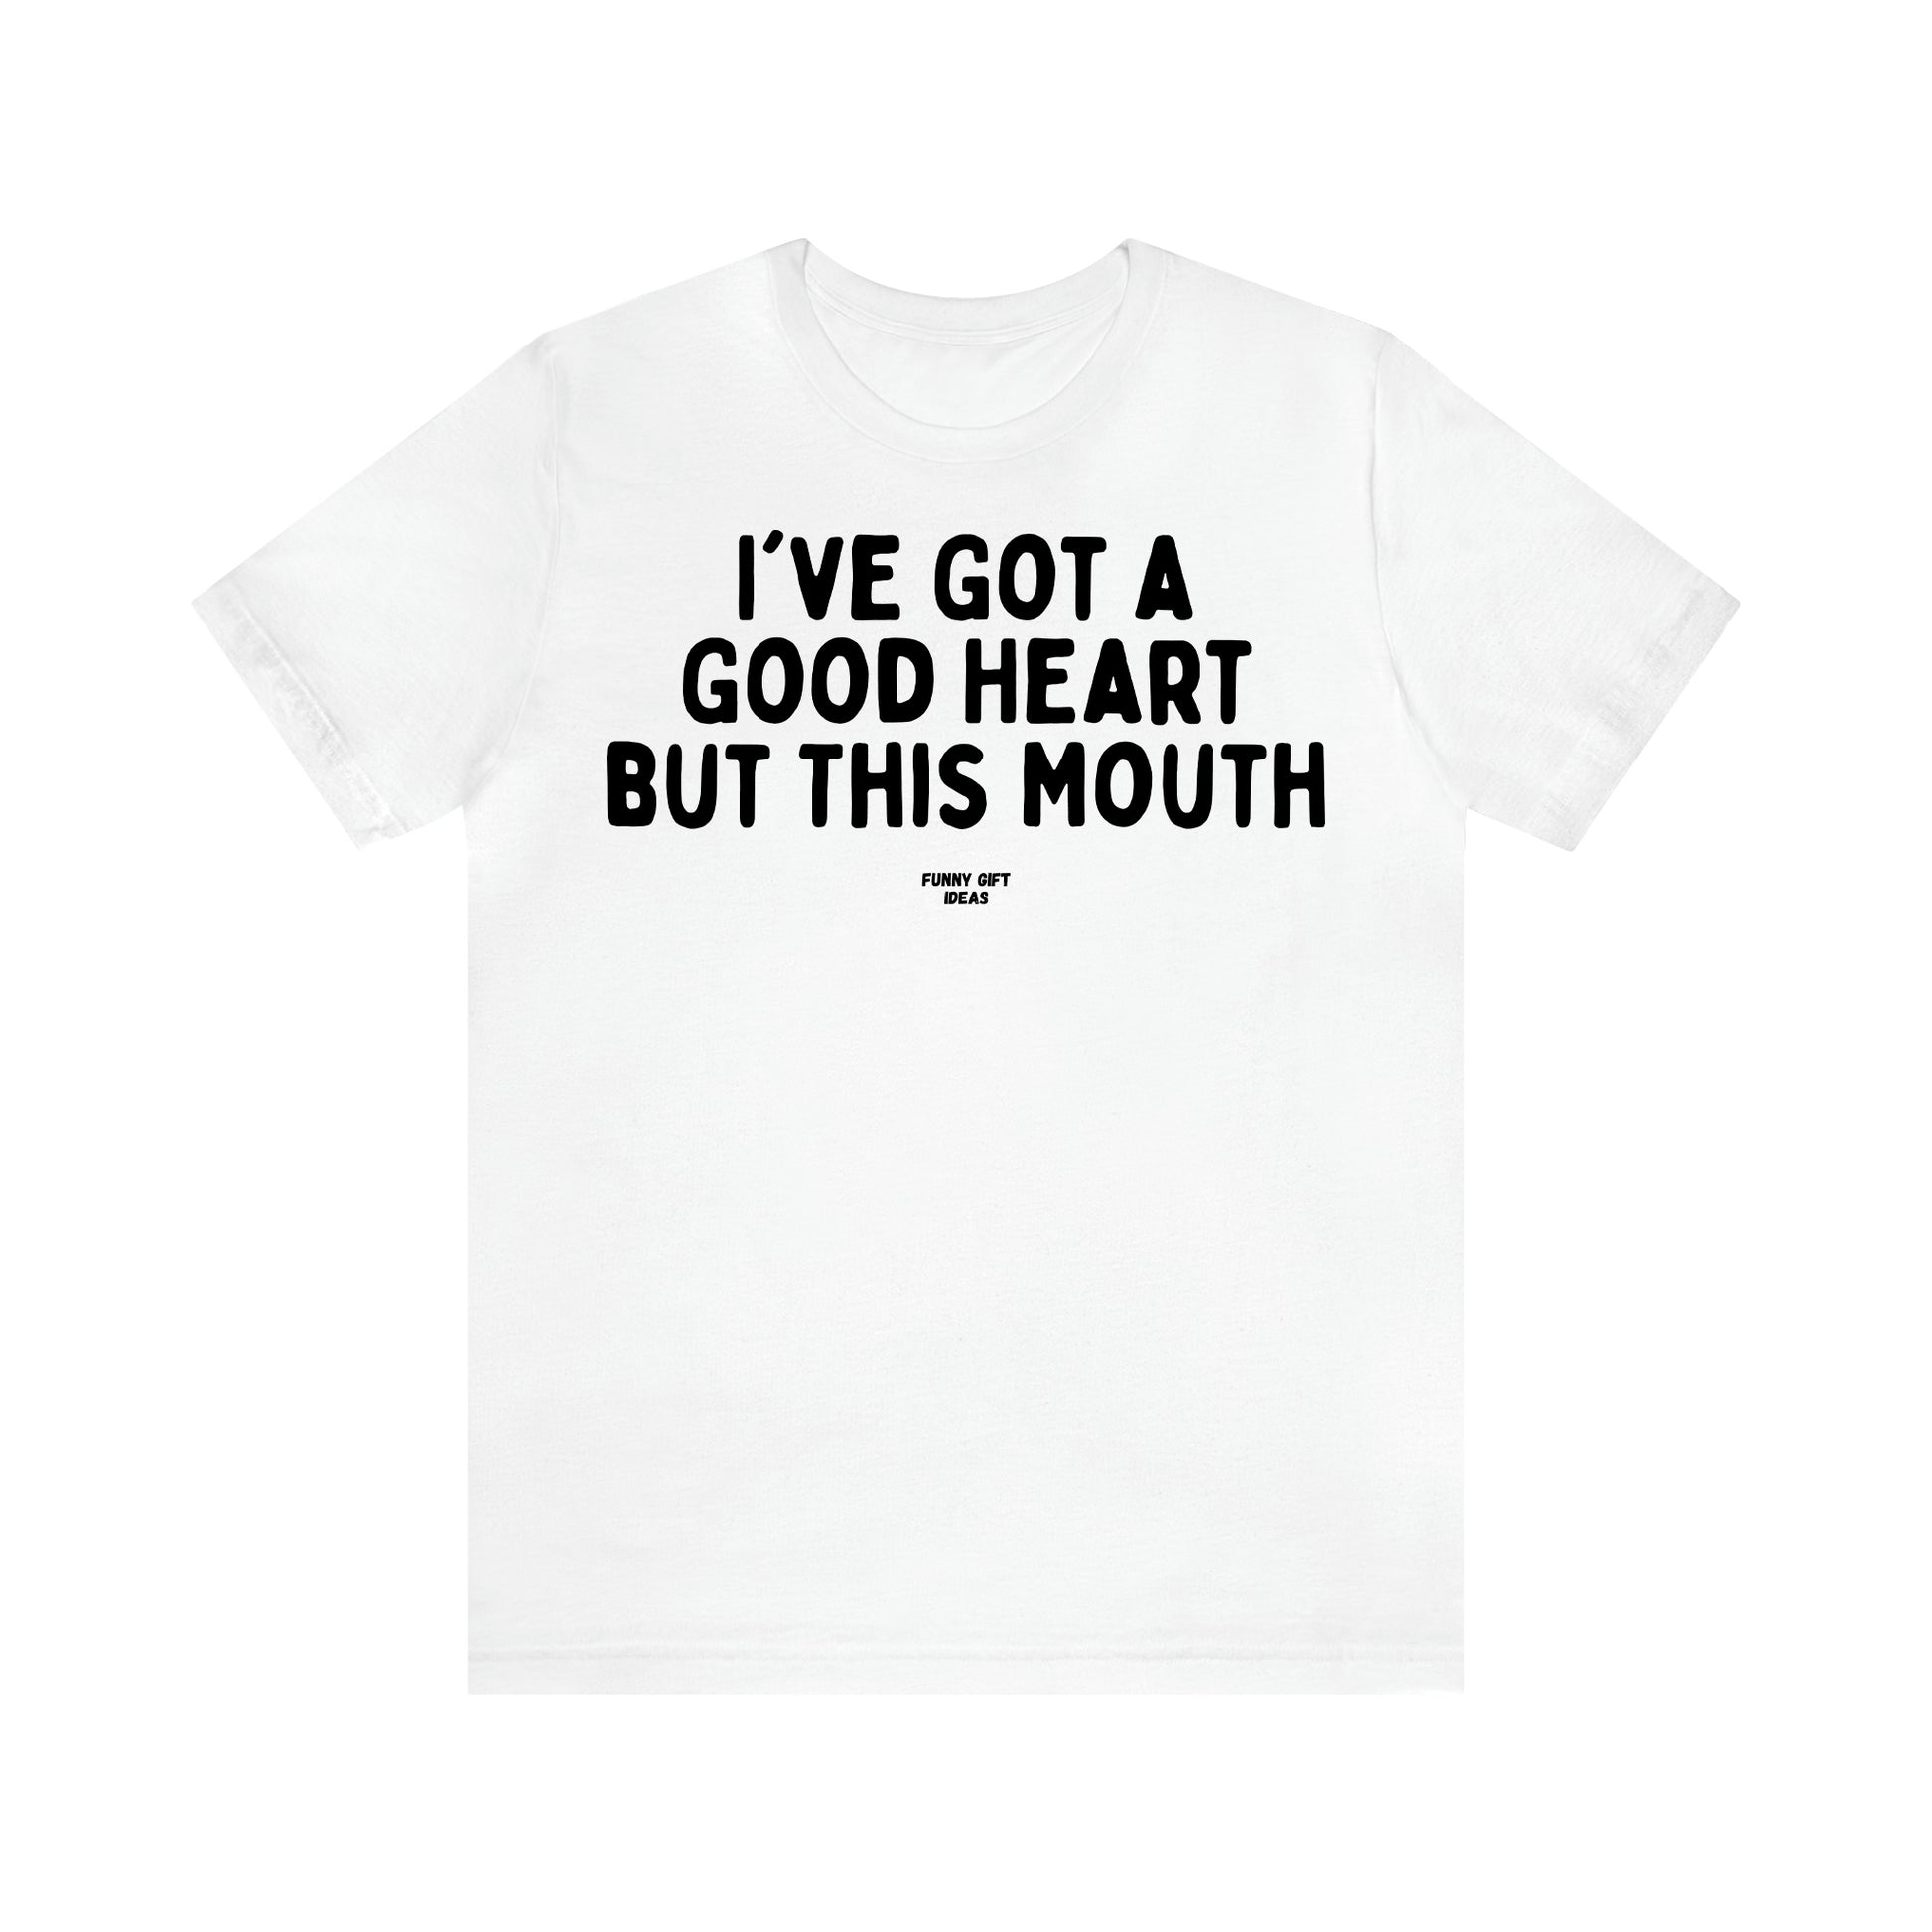 Women's T Shirts I've Got a Good Heart but This Mouth - Funny Gift Ideas